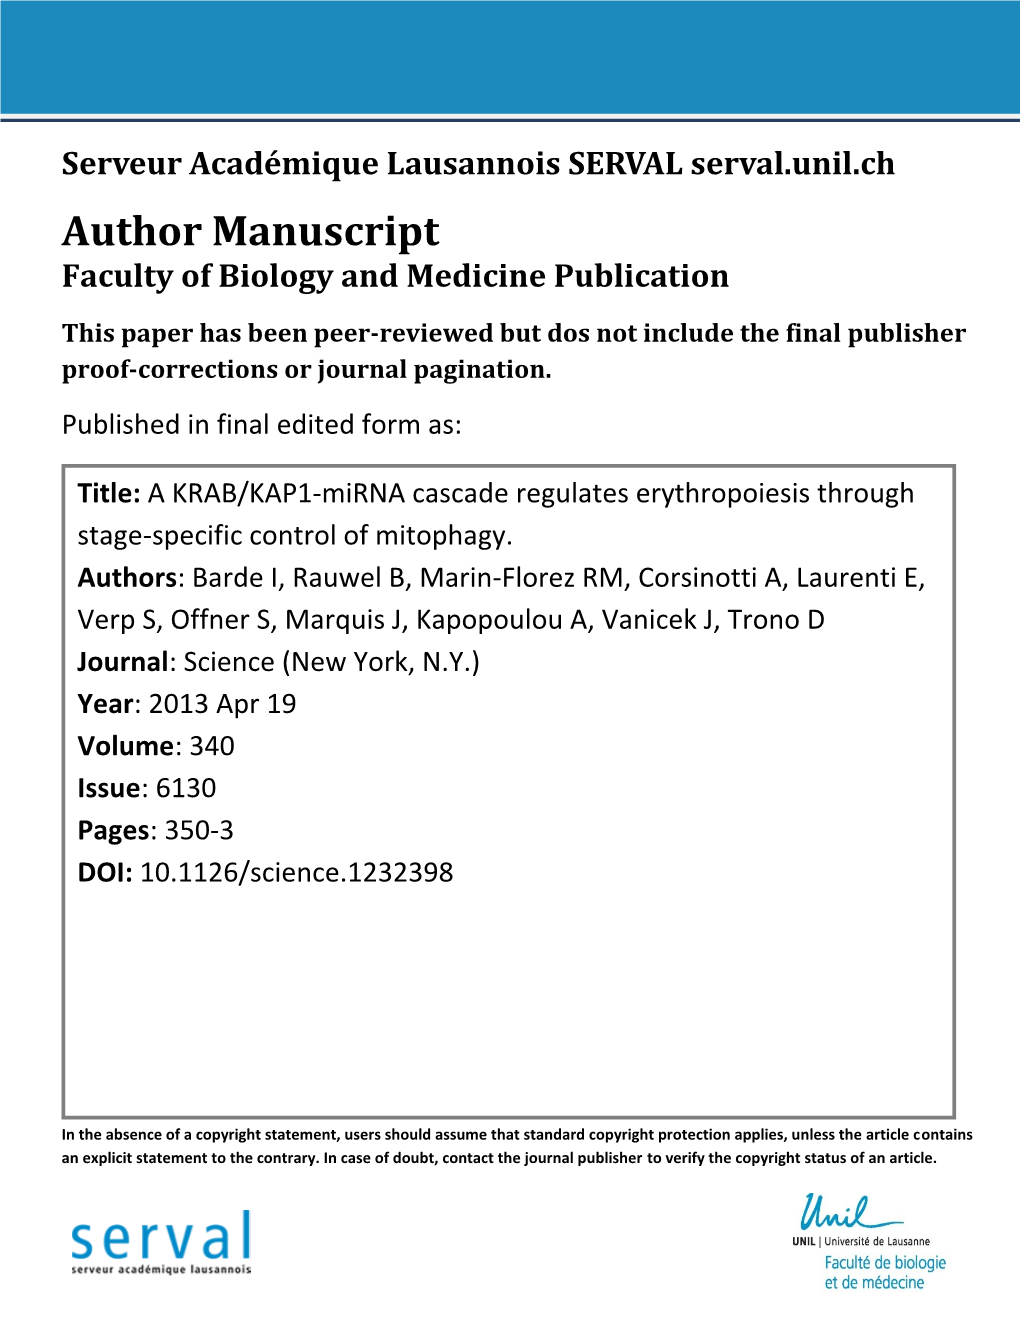 Author Manuscript Faculty of Biology and Medicine Publication